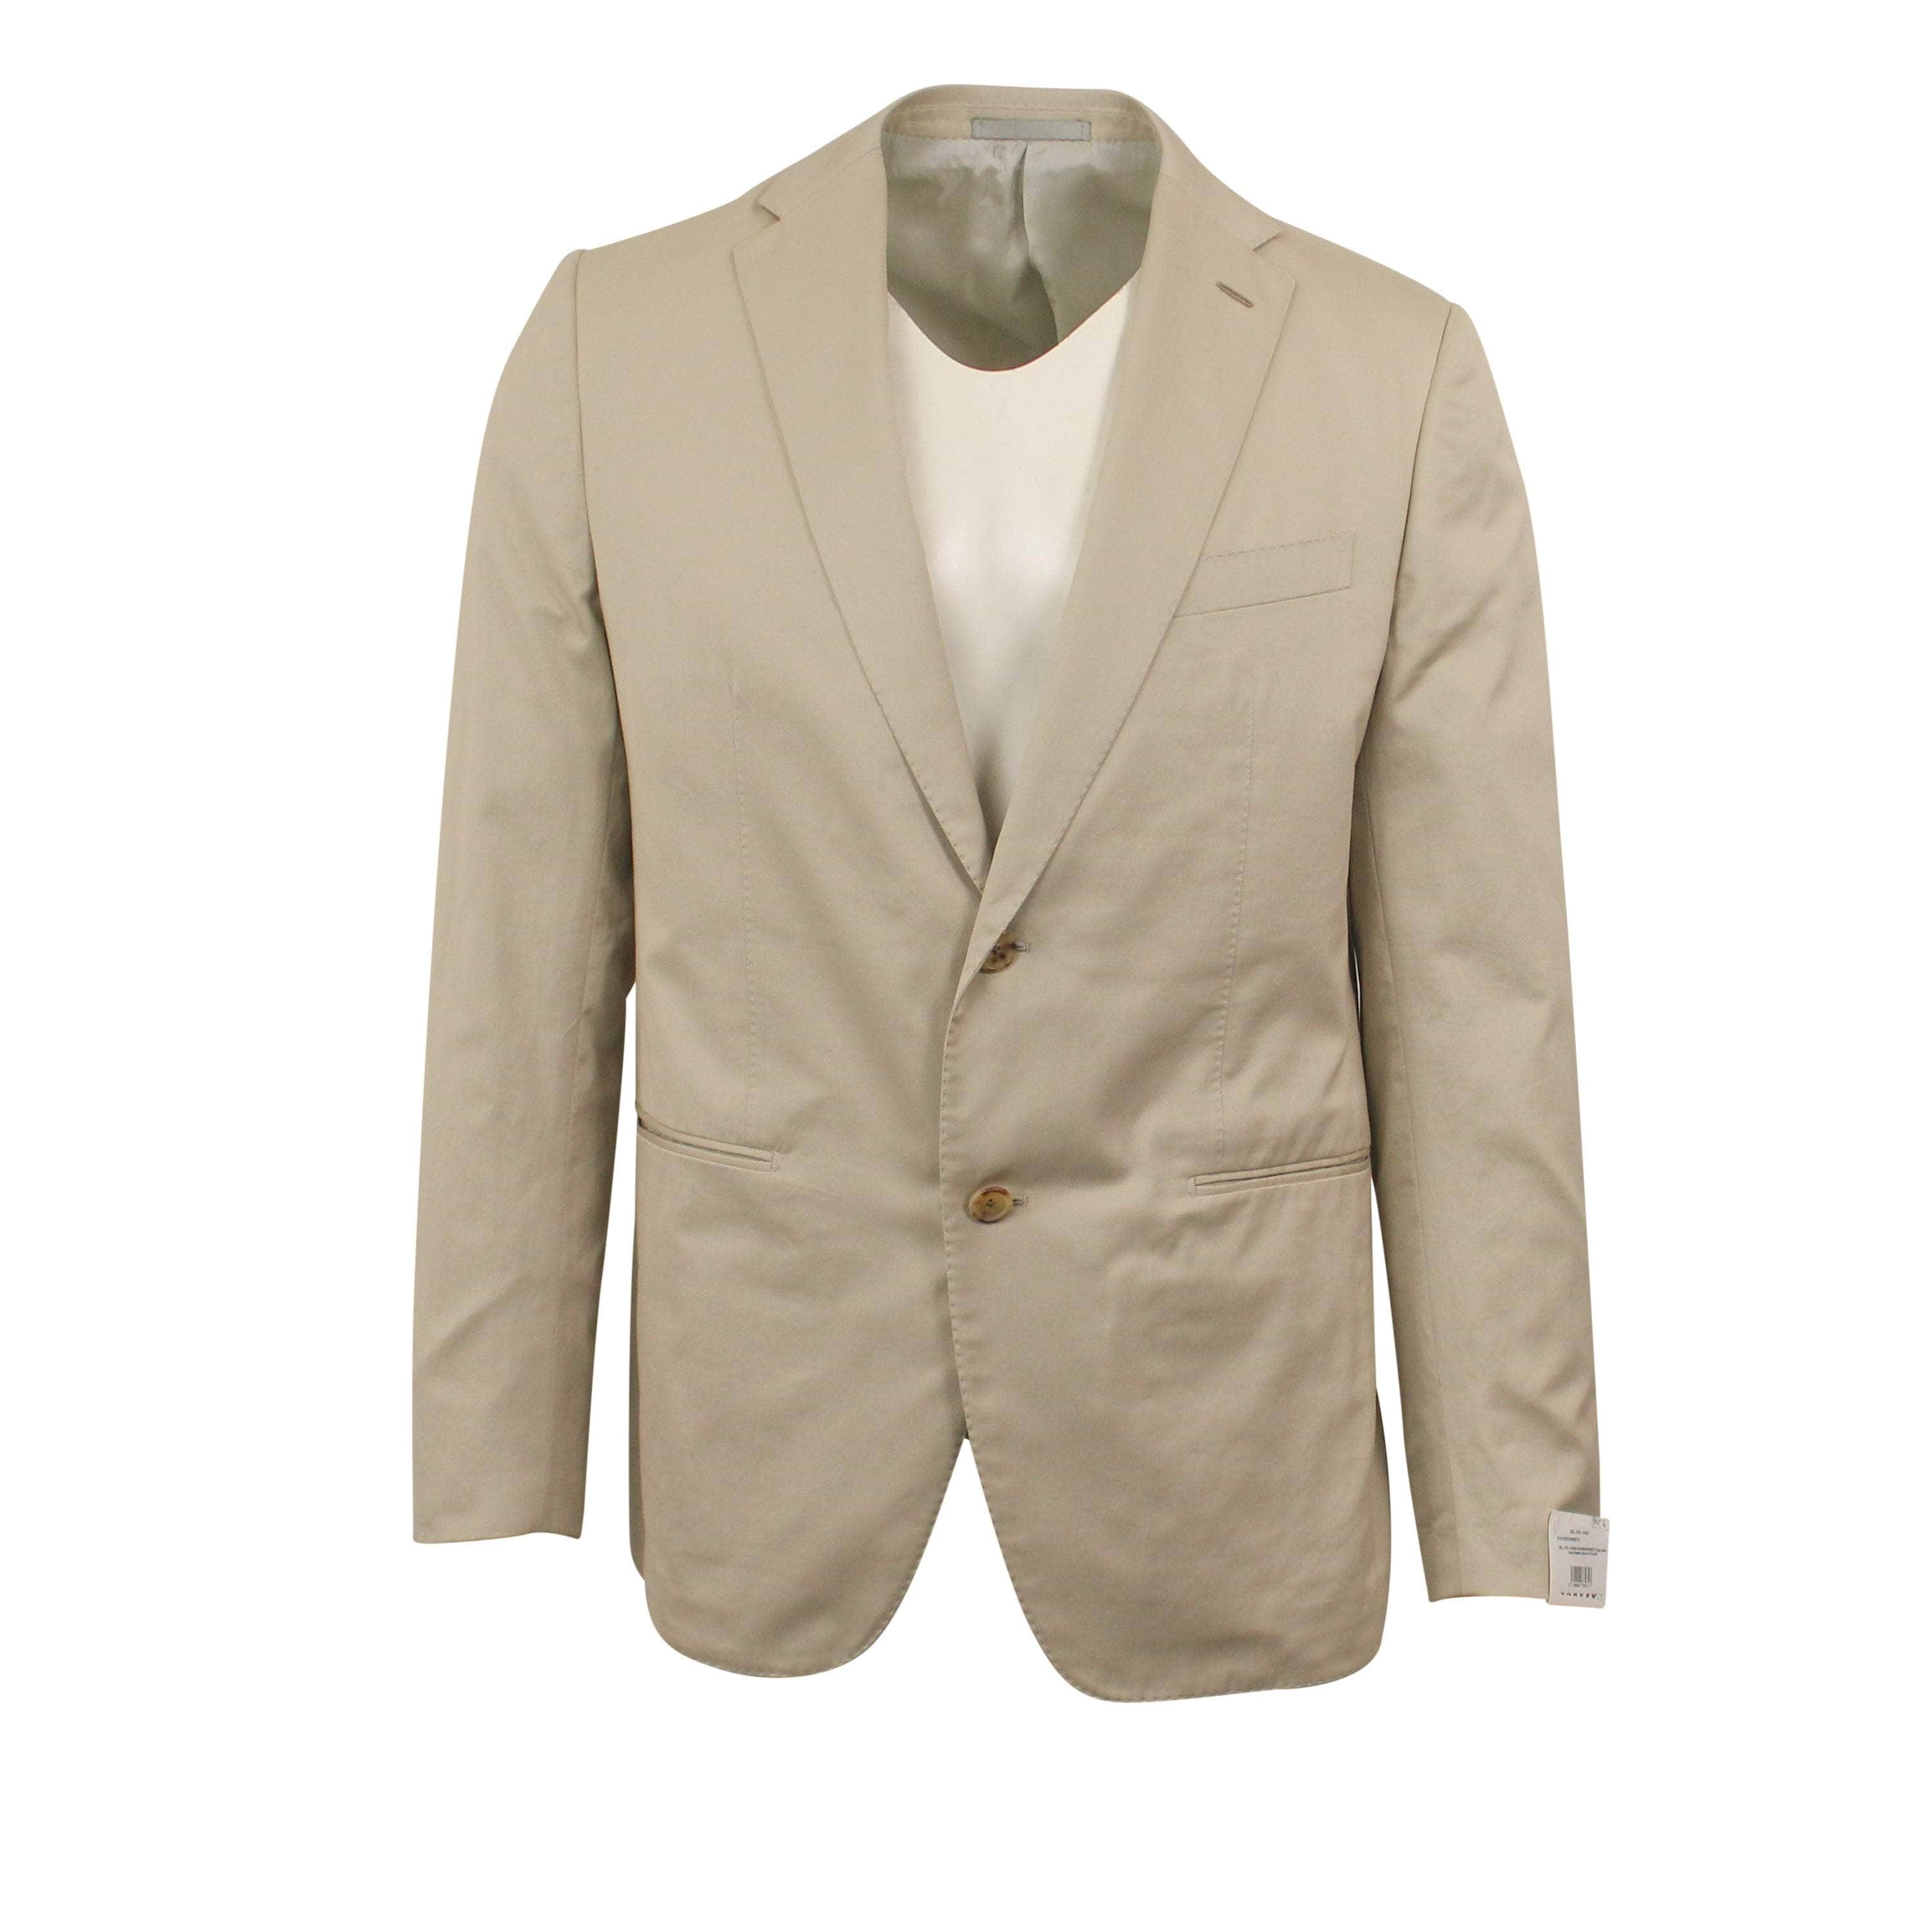 Caruso 500-750, caruso, channelenable-all, chicmi, couponcollection, main-clothing, shop375, size-50, Stadium Goods, stadiumgoods 50 Beige Single Breasted Cotton Suit 7R CRS-XTPS-0163/50 CRS-XTPS-0163/50